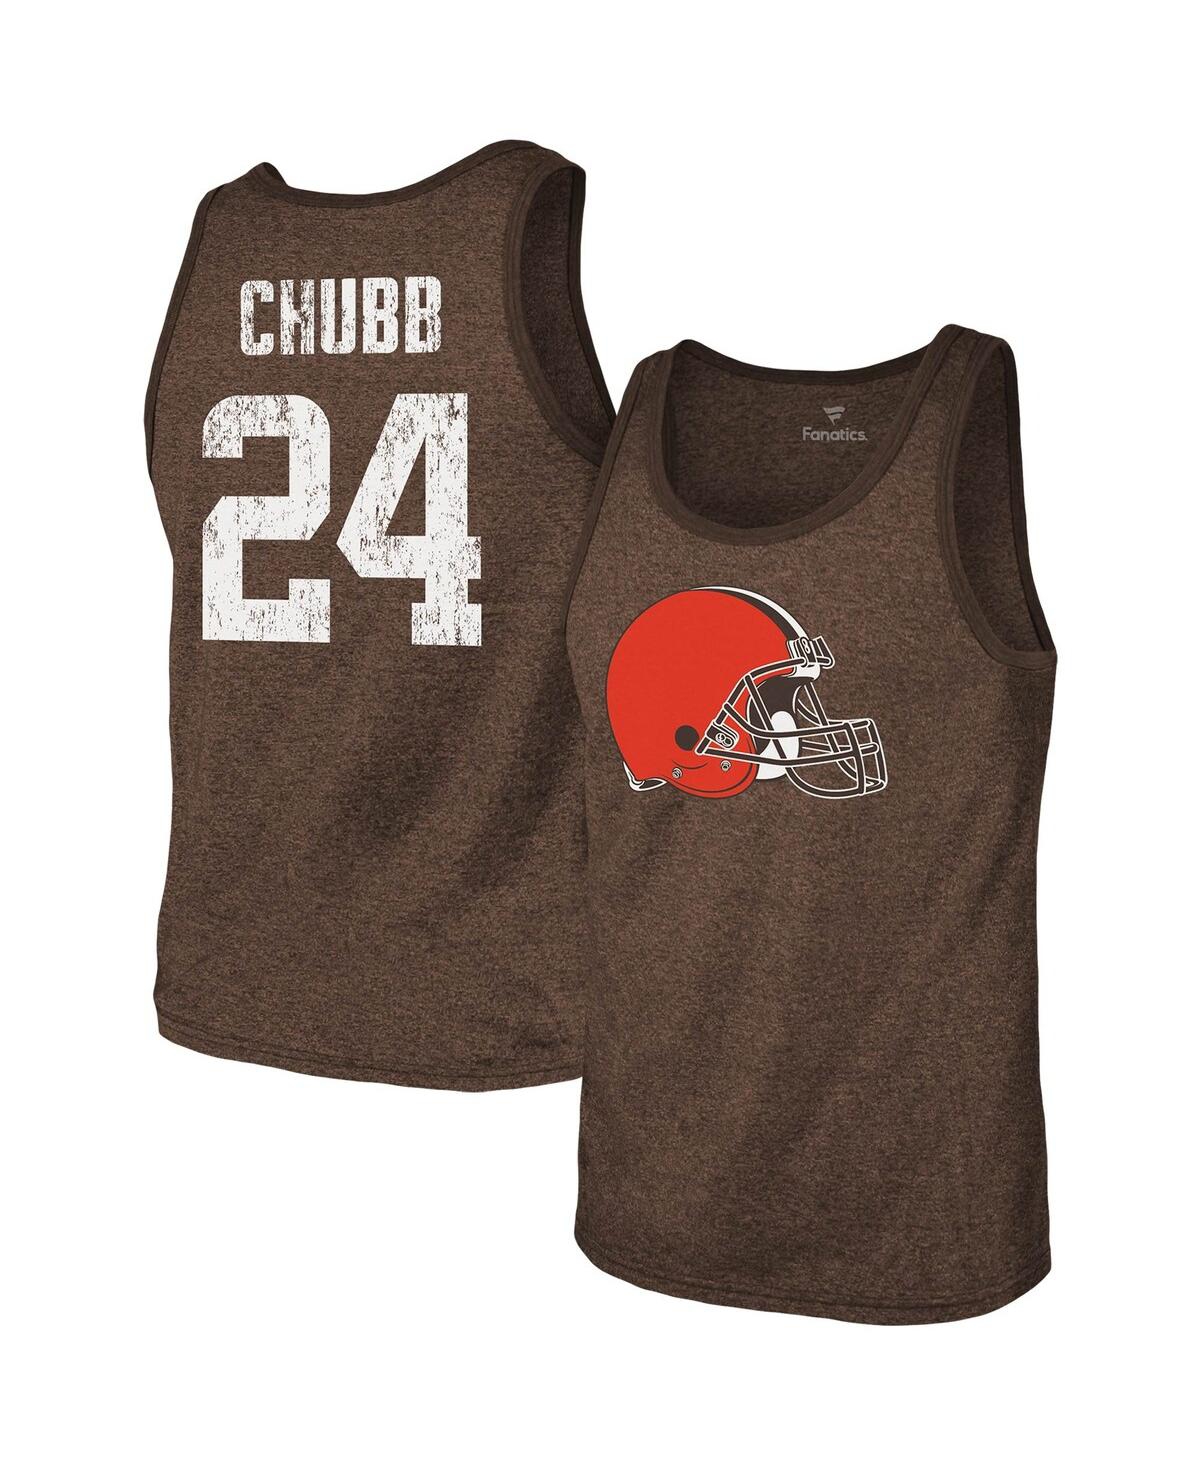 Men's Majestic Threads Nick Chubb Heathered Brown Cleveland Browns Name and Number Tri-Blend Tank Top - Heathered Brown